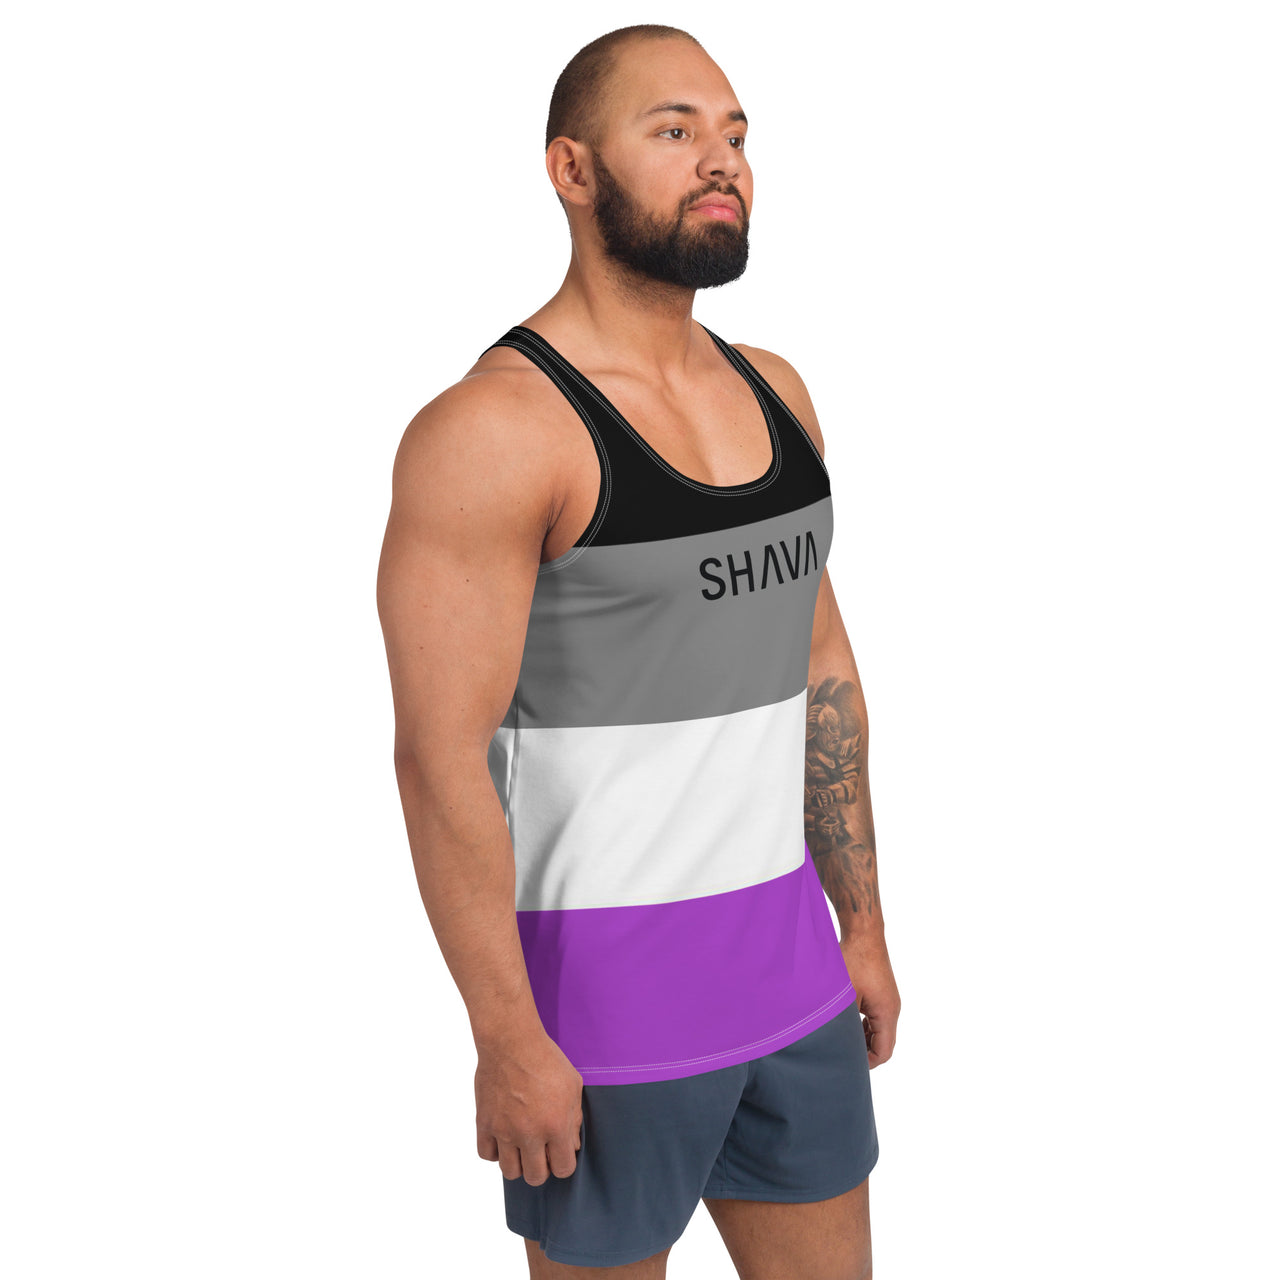 Asexual Flag LGBTQ Tank Top Unisex Size SHAVA CO